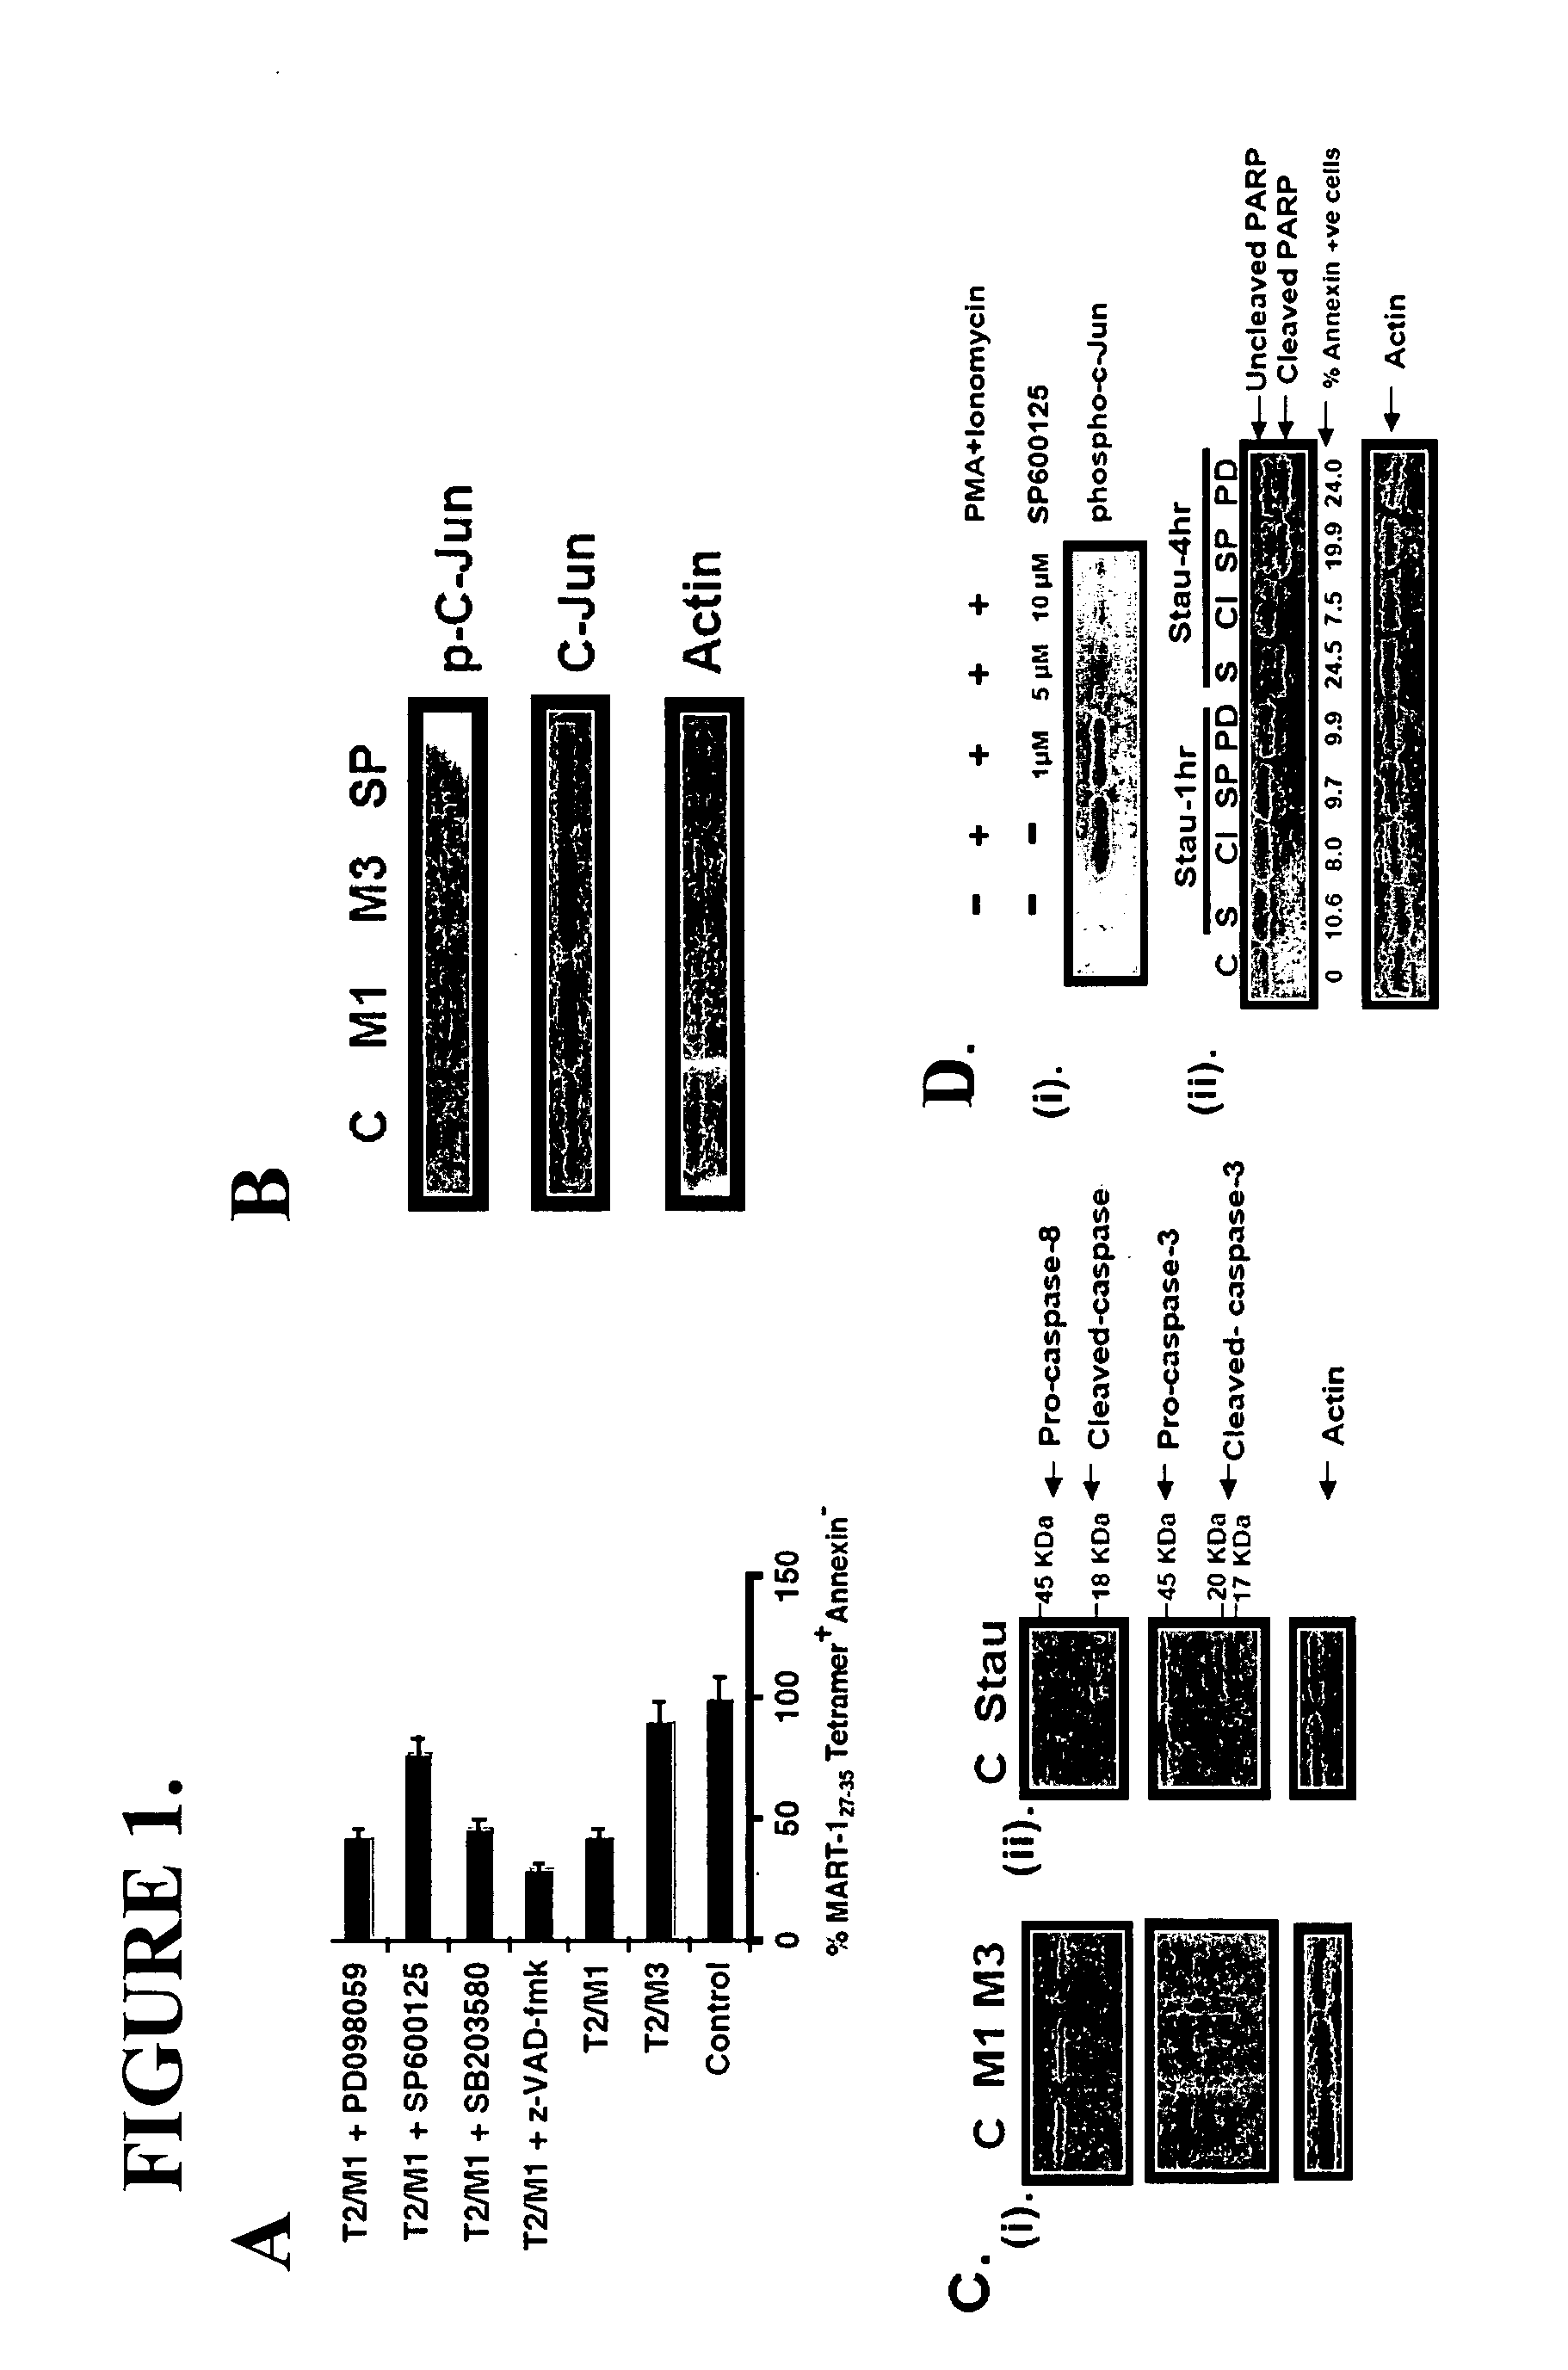 Methods for improving immunotherapy by enhancing survival of antigen-specific cytotoxic T lymphocytes